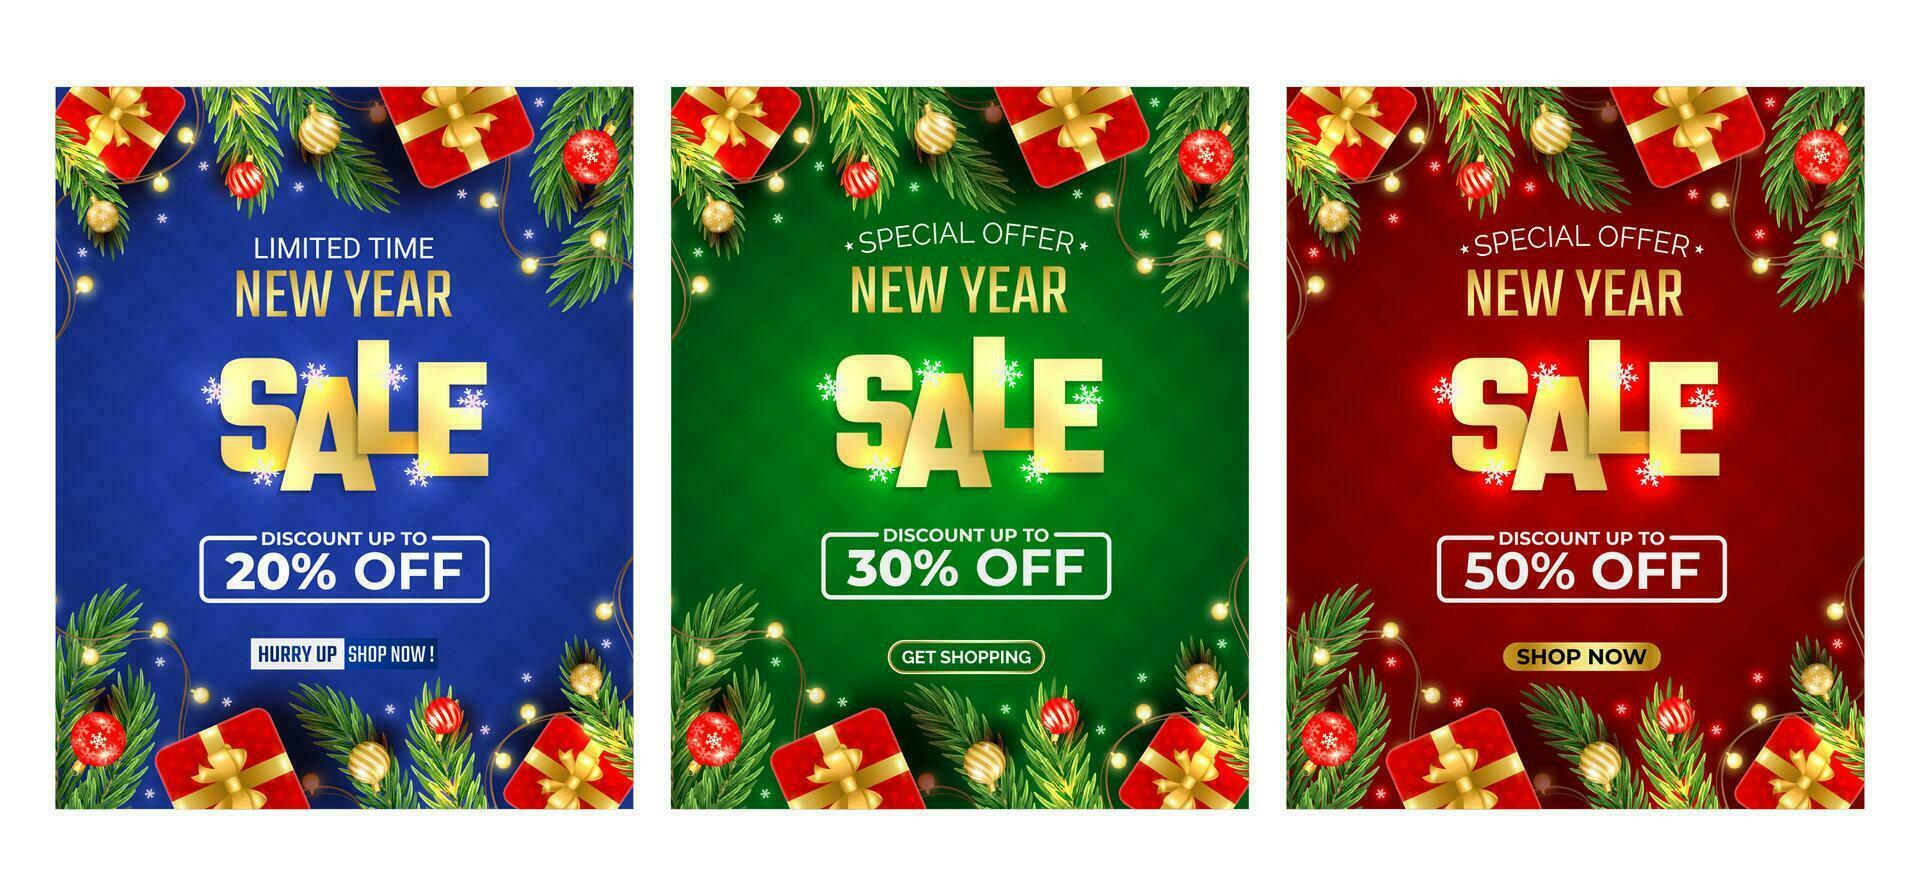 NEW YEAR 2024 SALE, Merry Christmas and Happy New Year concept with Christmas branch, balls, snowflakes. For sale, banner, posters, cover design templates, social media wallpaper stories vector